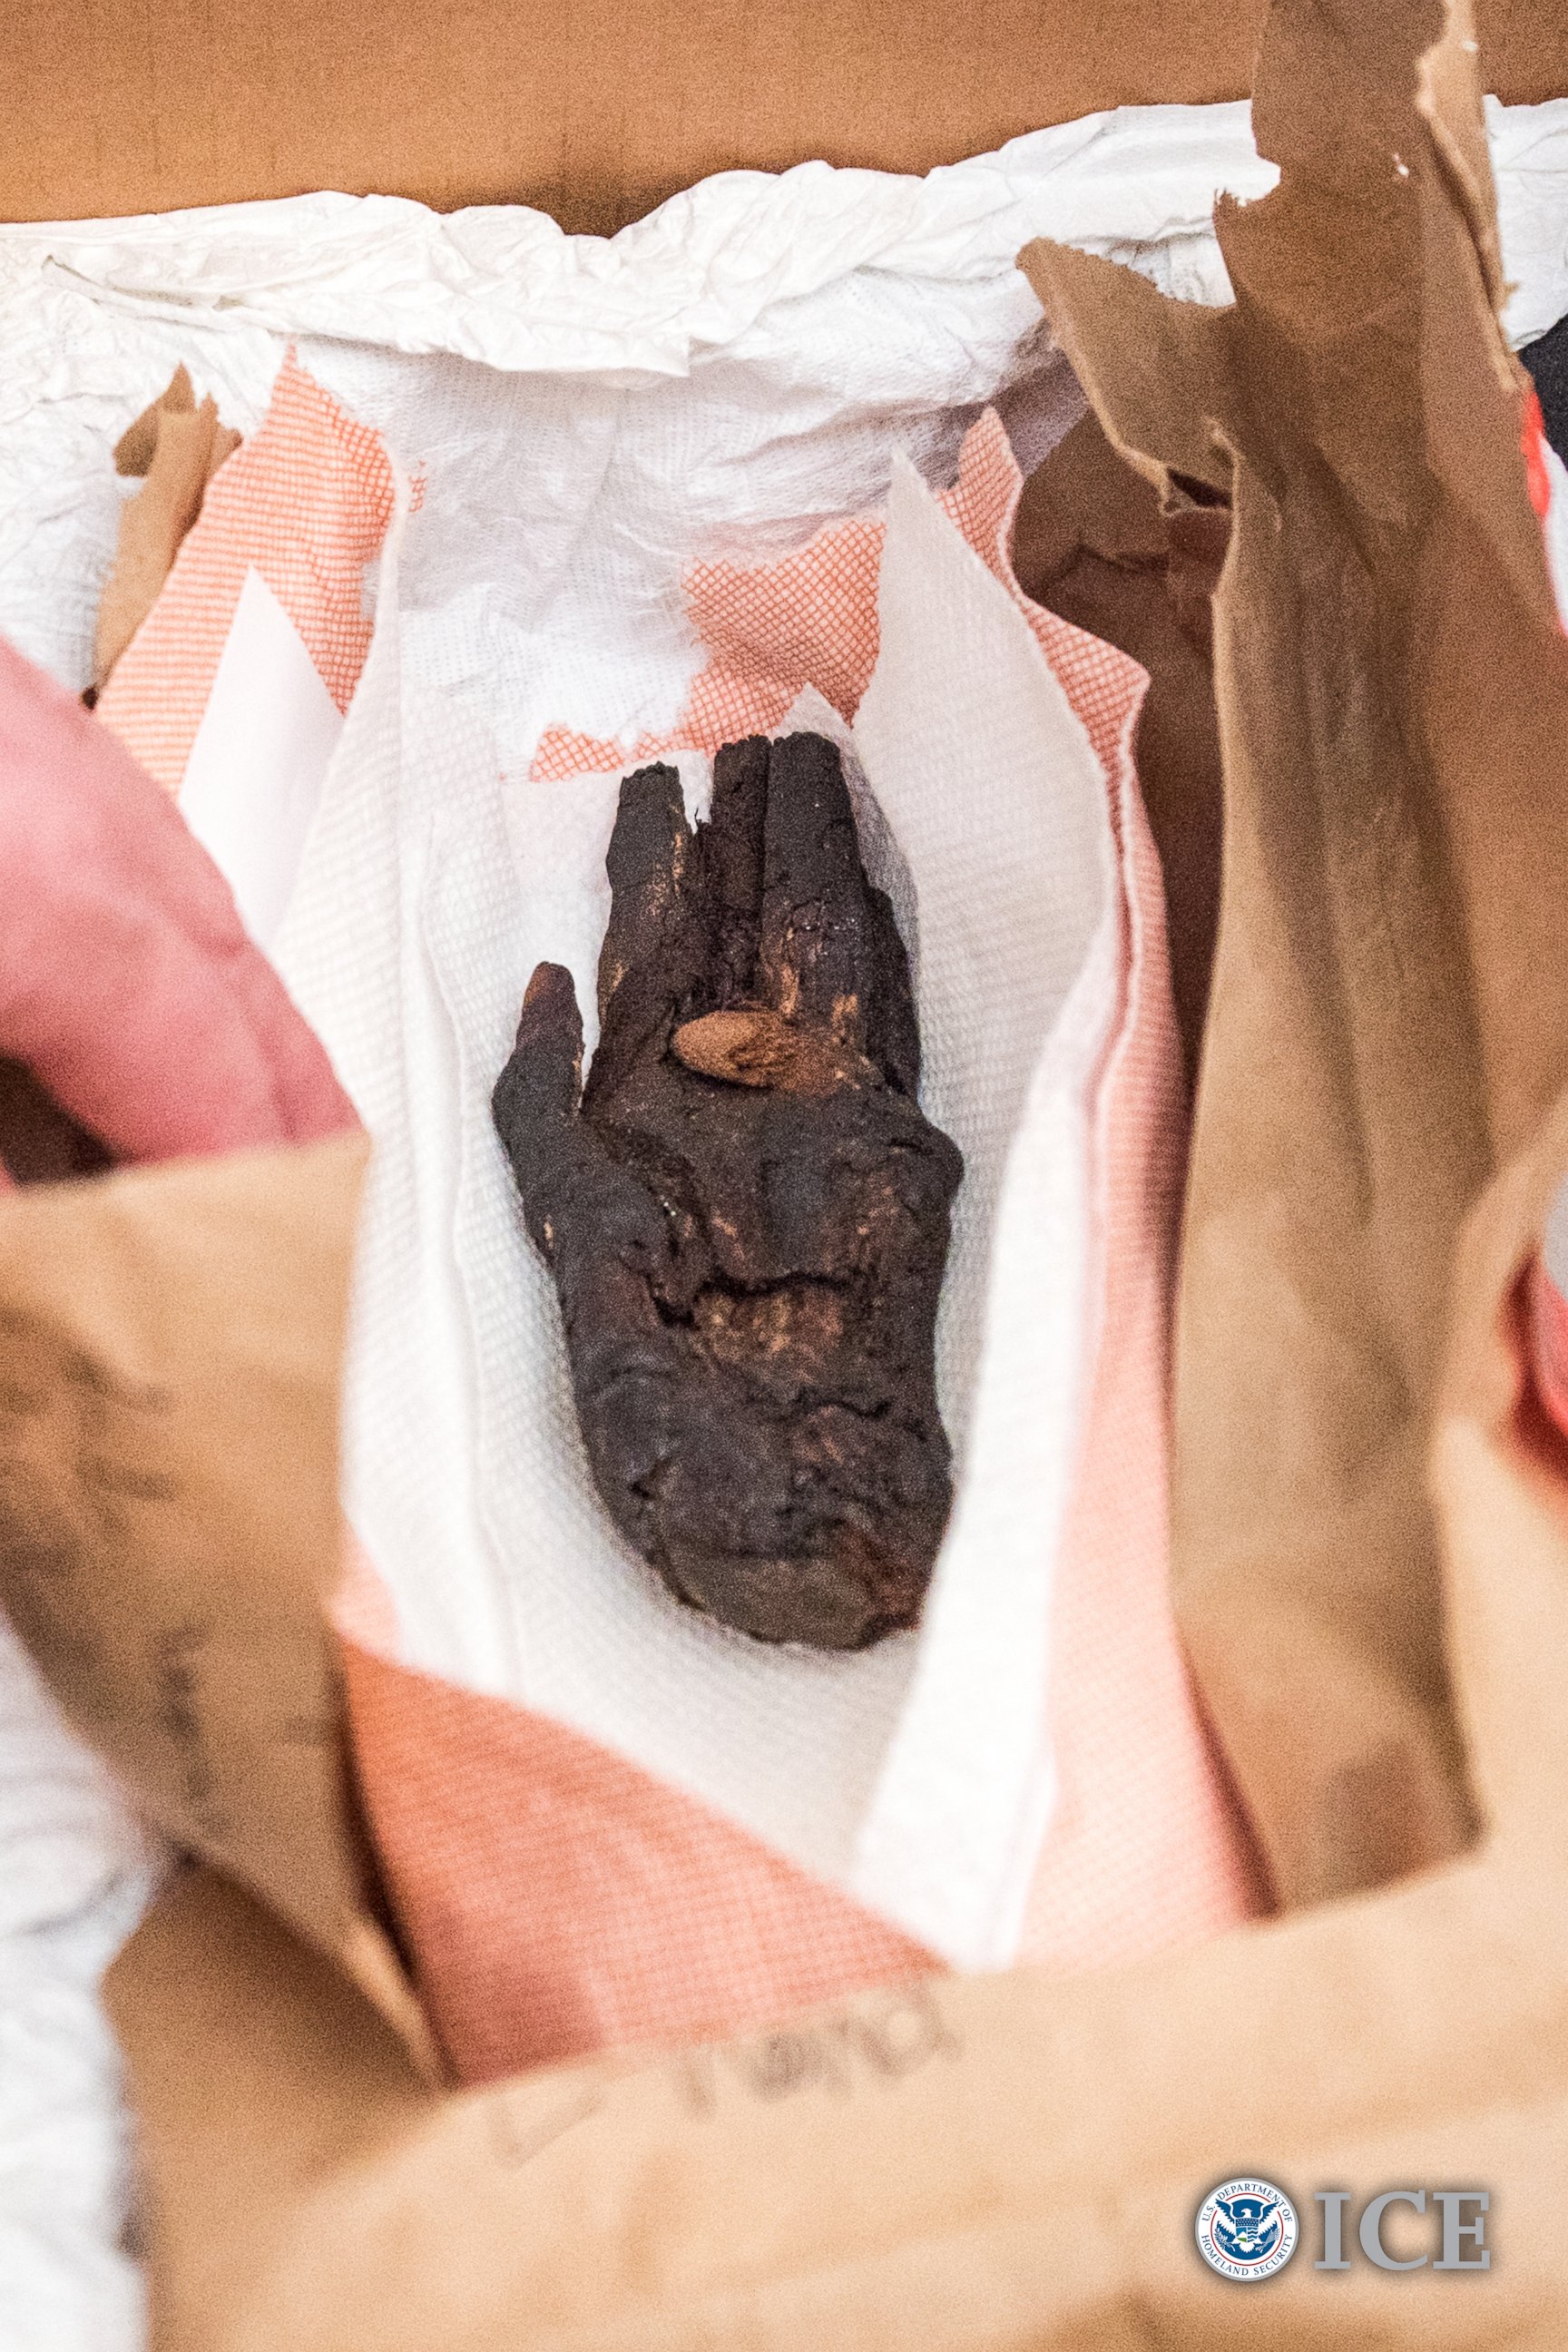 PHOTO: One of a series of illegally smuggled ancient artifacts repatriated to the government of Egypt at a ceremony December 1, 2016 at the Egyptian Embassy in Washington.